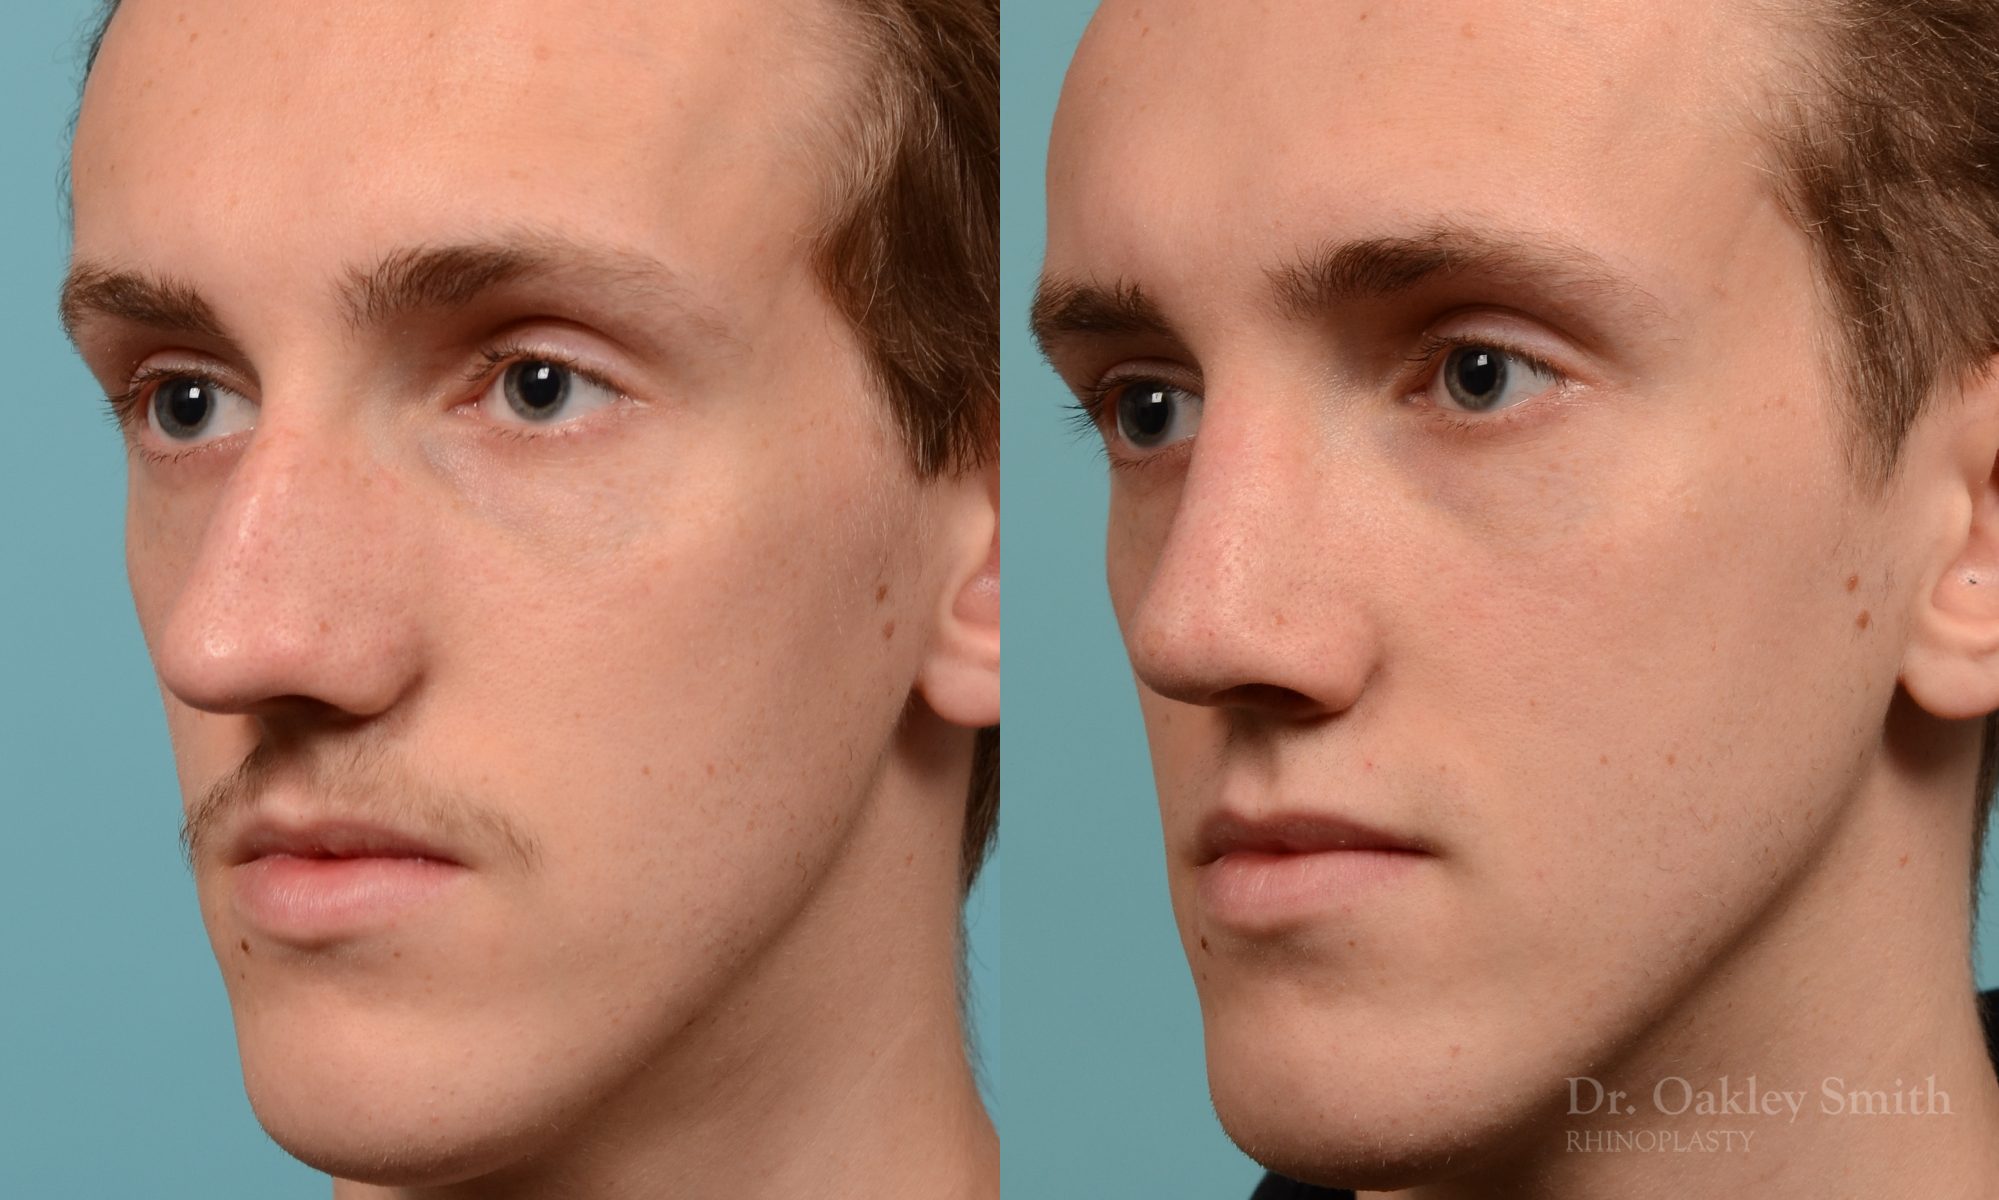 Male rhinoplasty for a curved nose